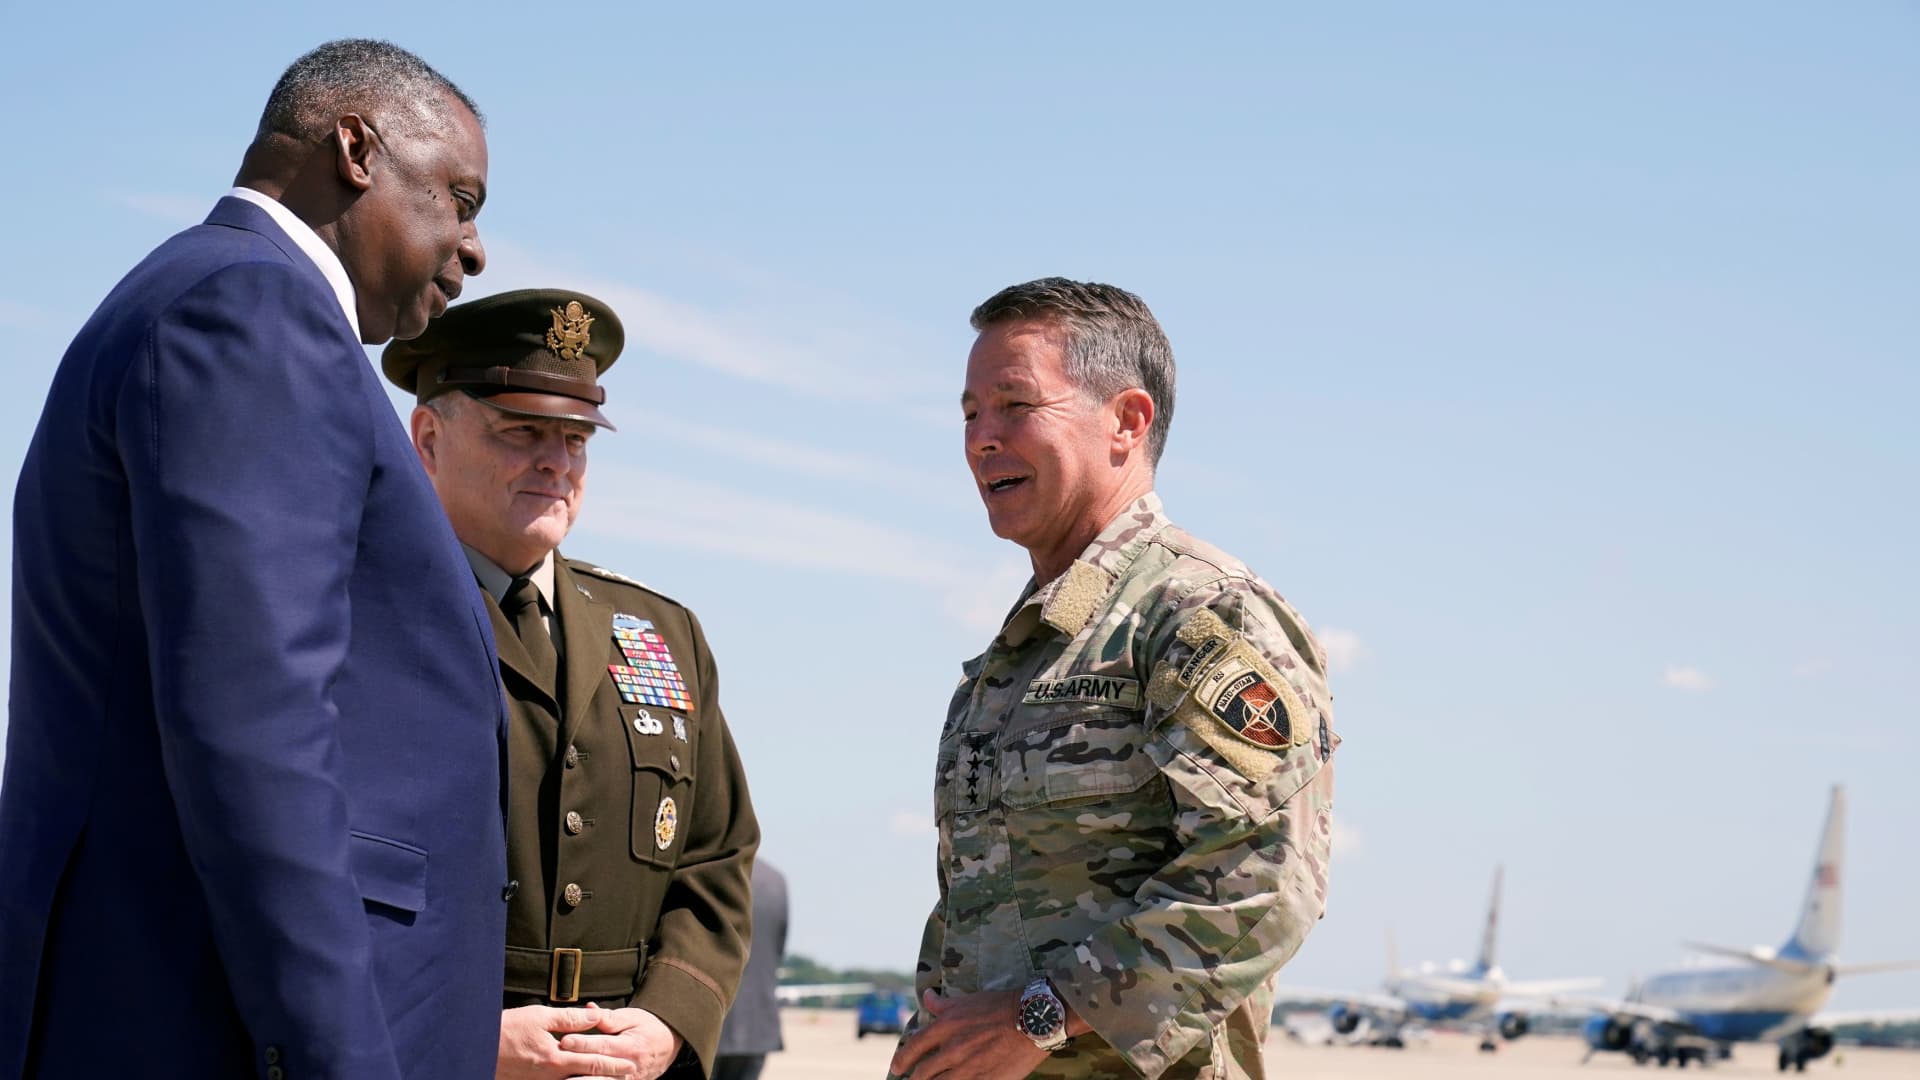 U.S. Secretary of Defense Lloyd Austin, left, and Joint Chiefs of Staff General Mark Milley greet General Austin S. Miller, the former top U.S. commander in Afghanistan, upon his return, at Andrews Air Force Base, U.S. July 14, 2021.